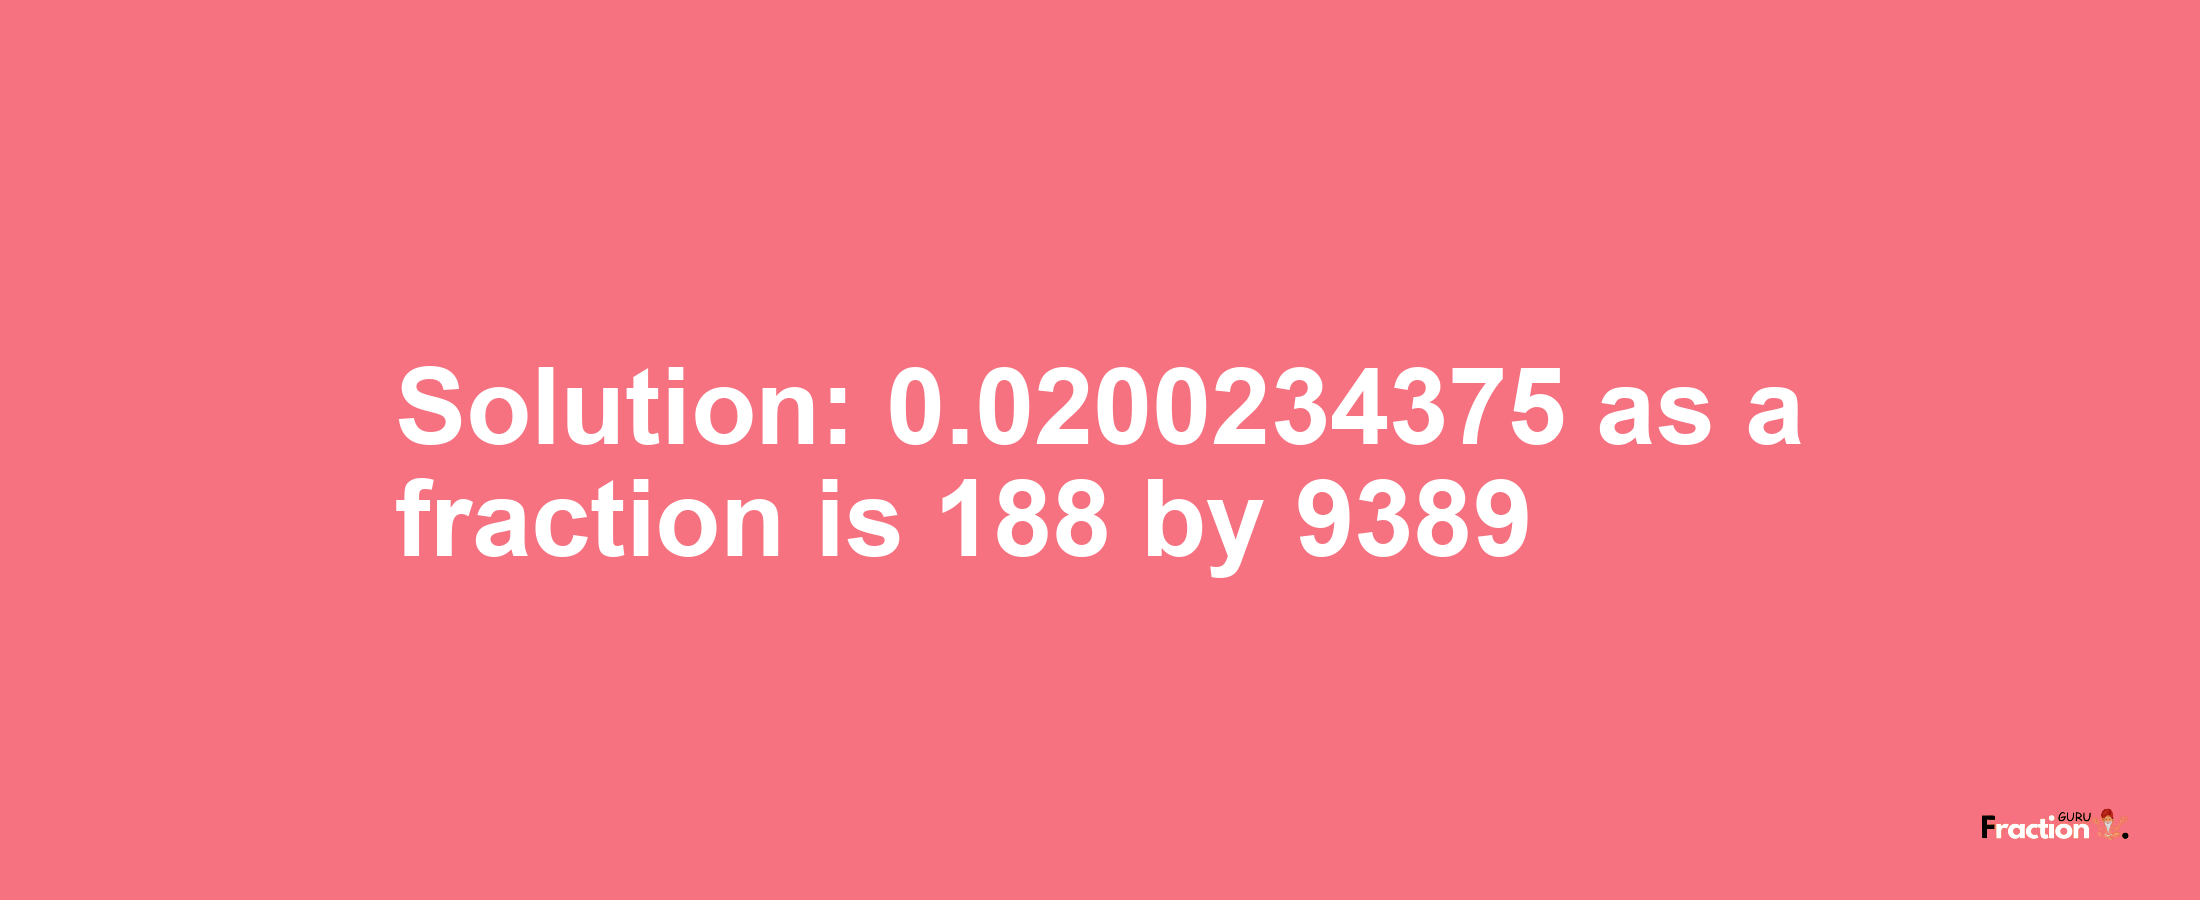 Solution:0.0200234375 as a fraction is 188/9389